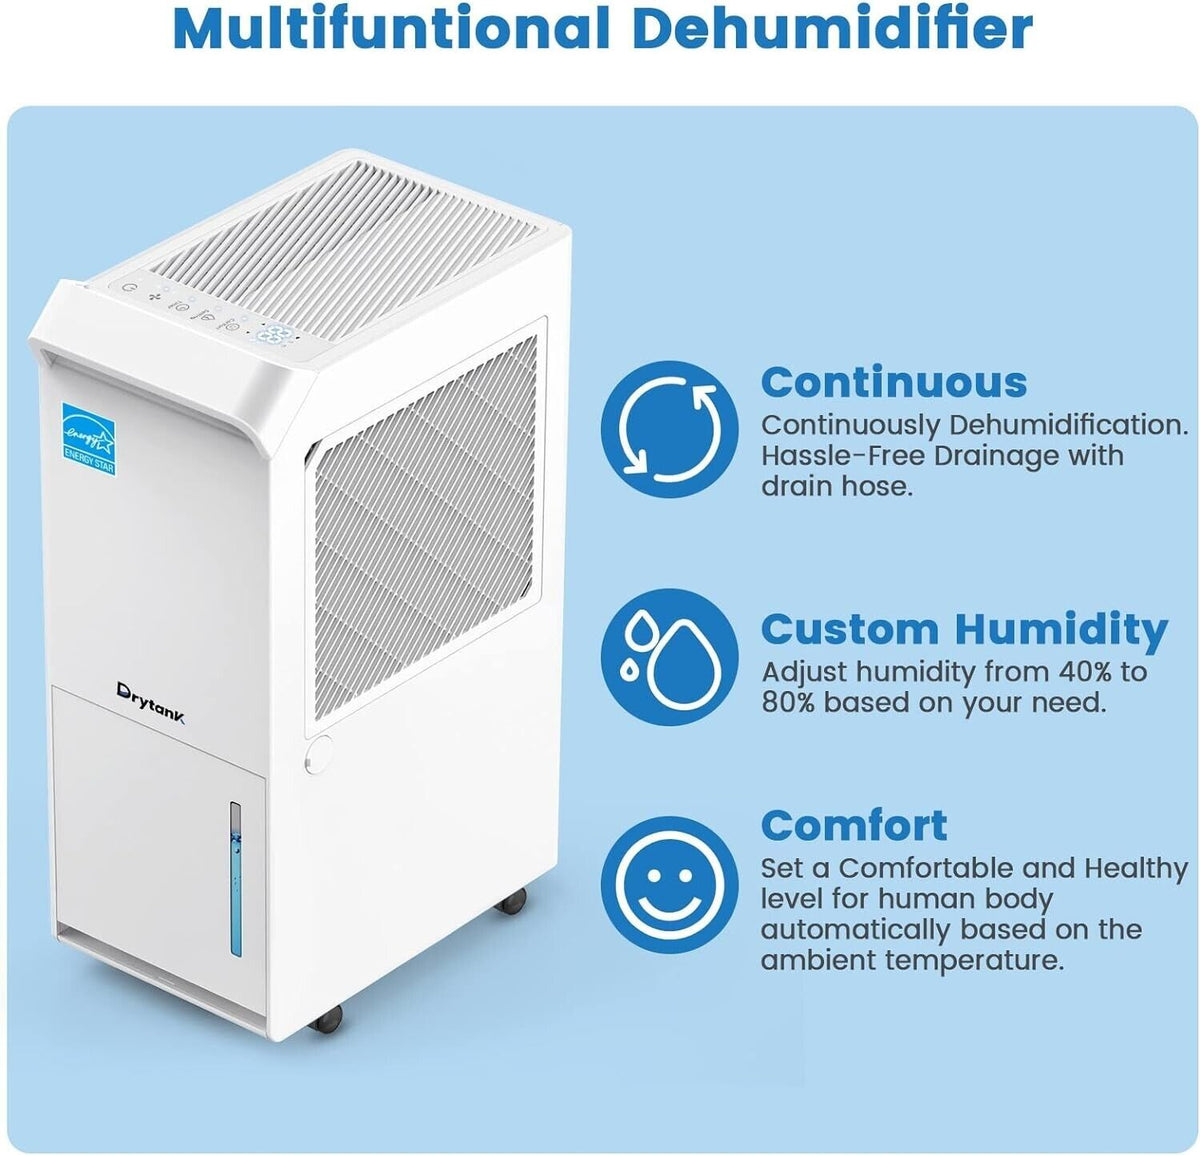 Vellgoo Dehumidifier for Large Room or Basements, Up to 4500 Sq.Ft